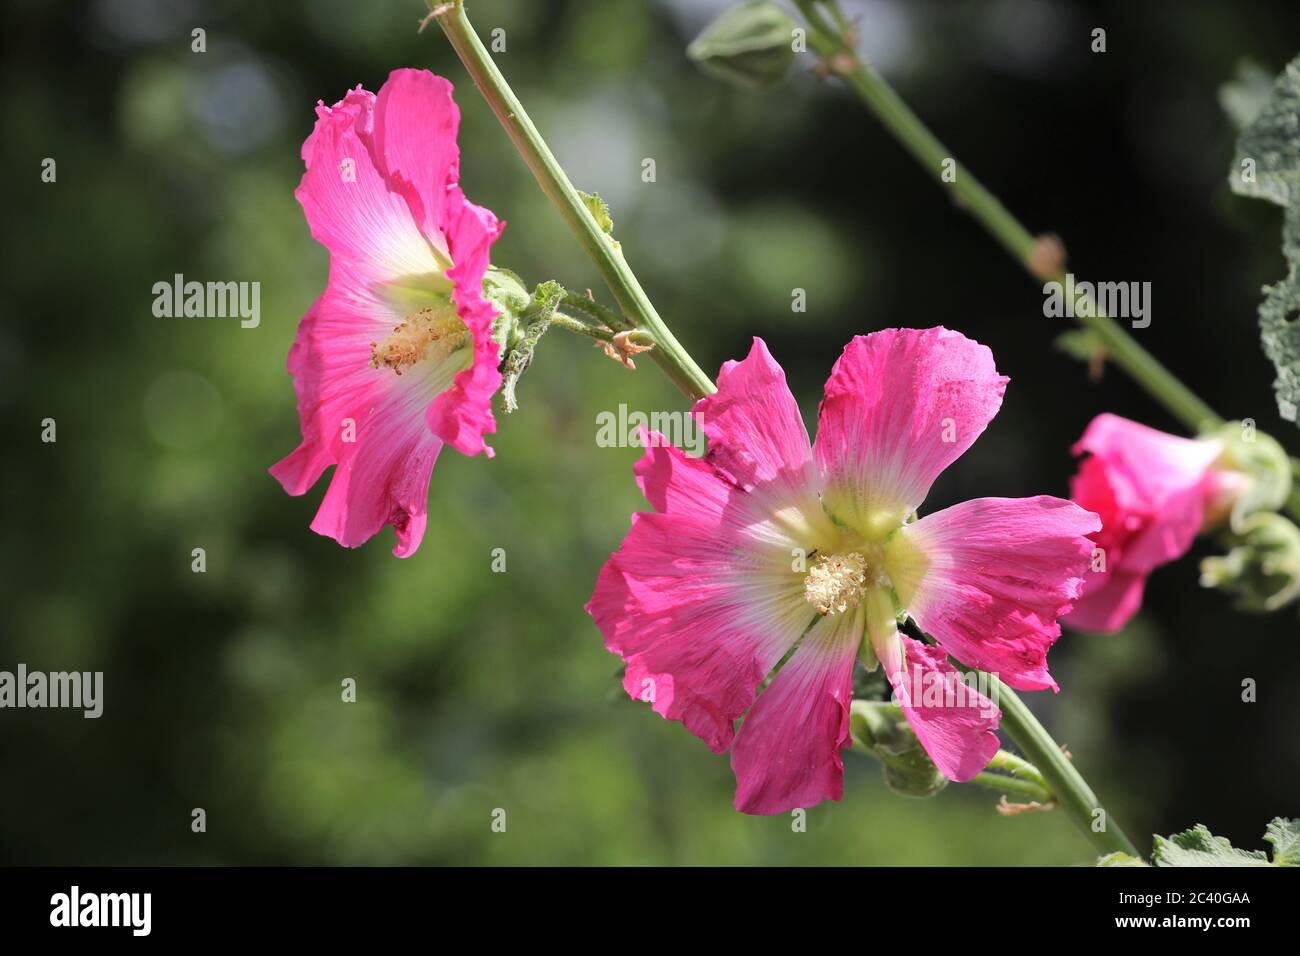 Marshmallow flower (Althaea officinalis) is a useful plant for human health. Photo of medicinal plants and marshmallow flowers. Stock Photo